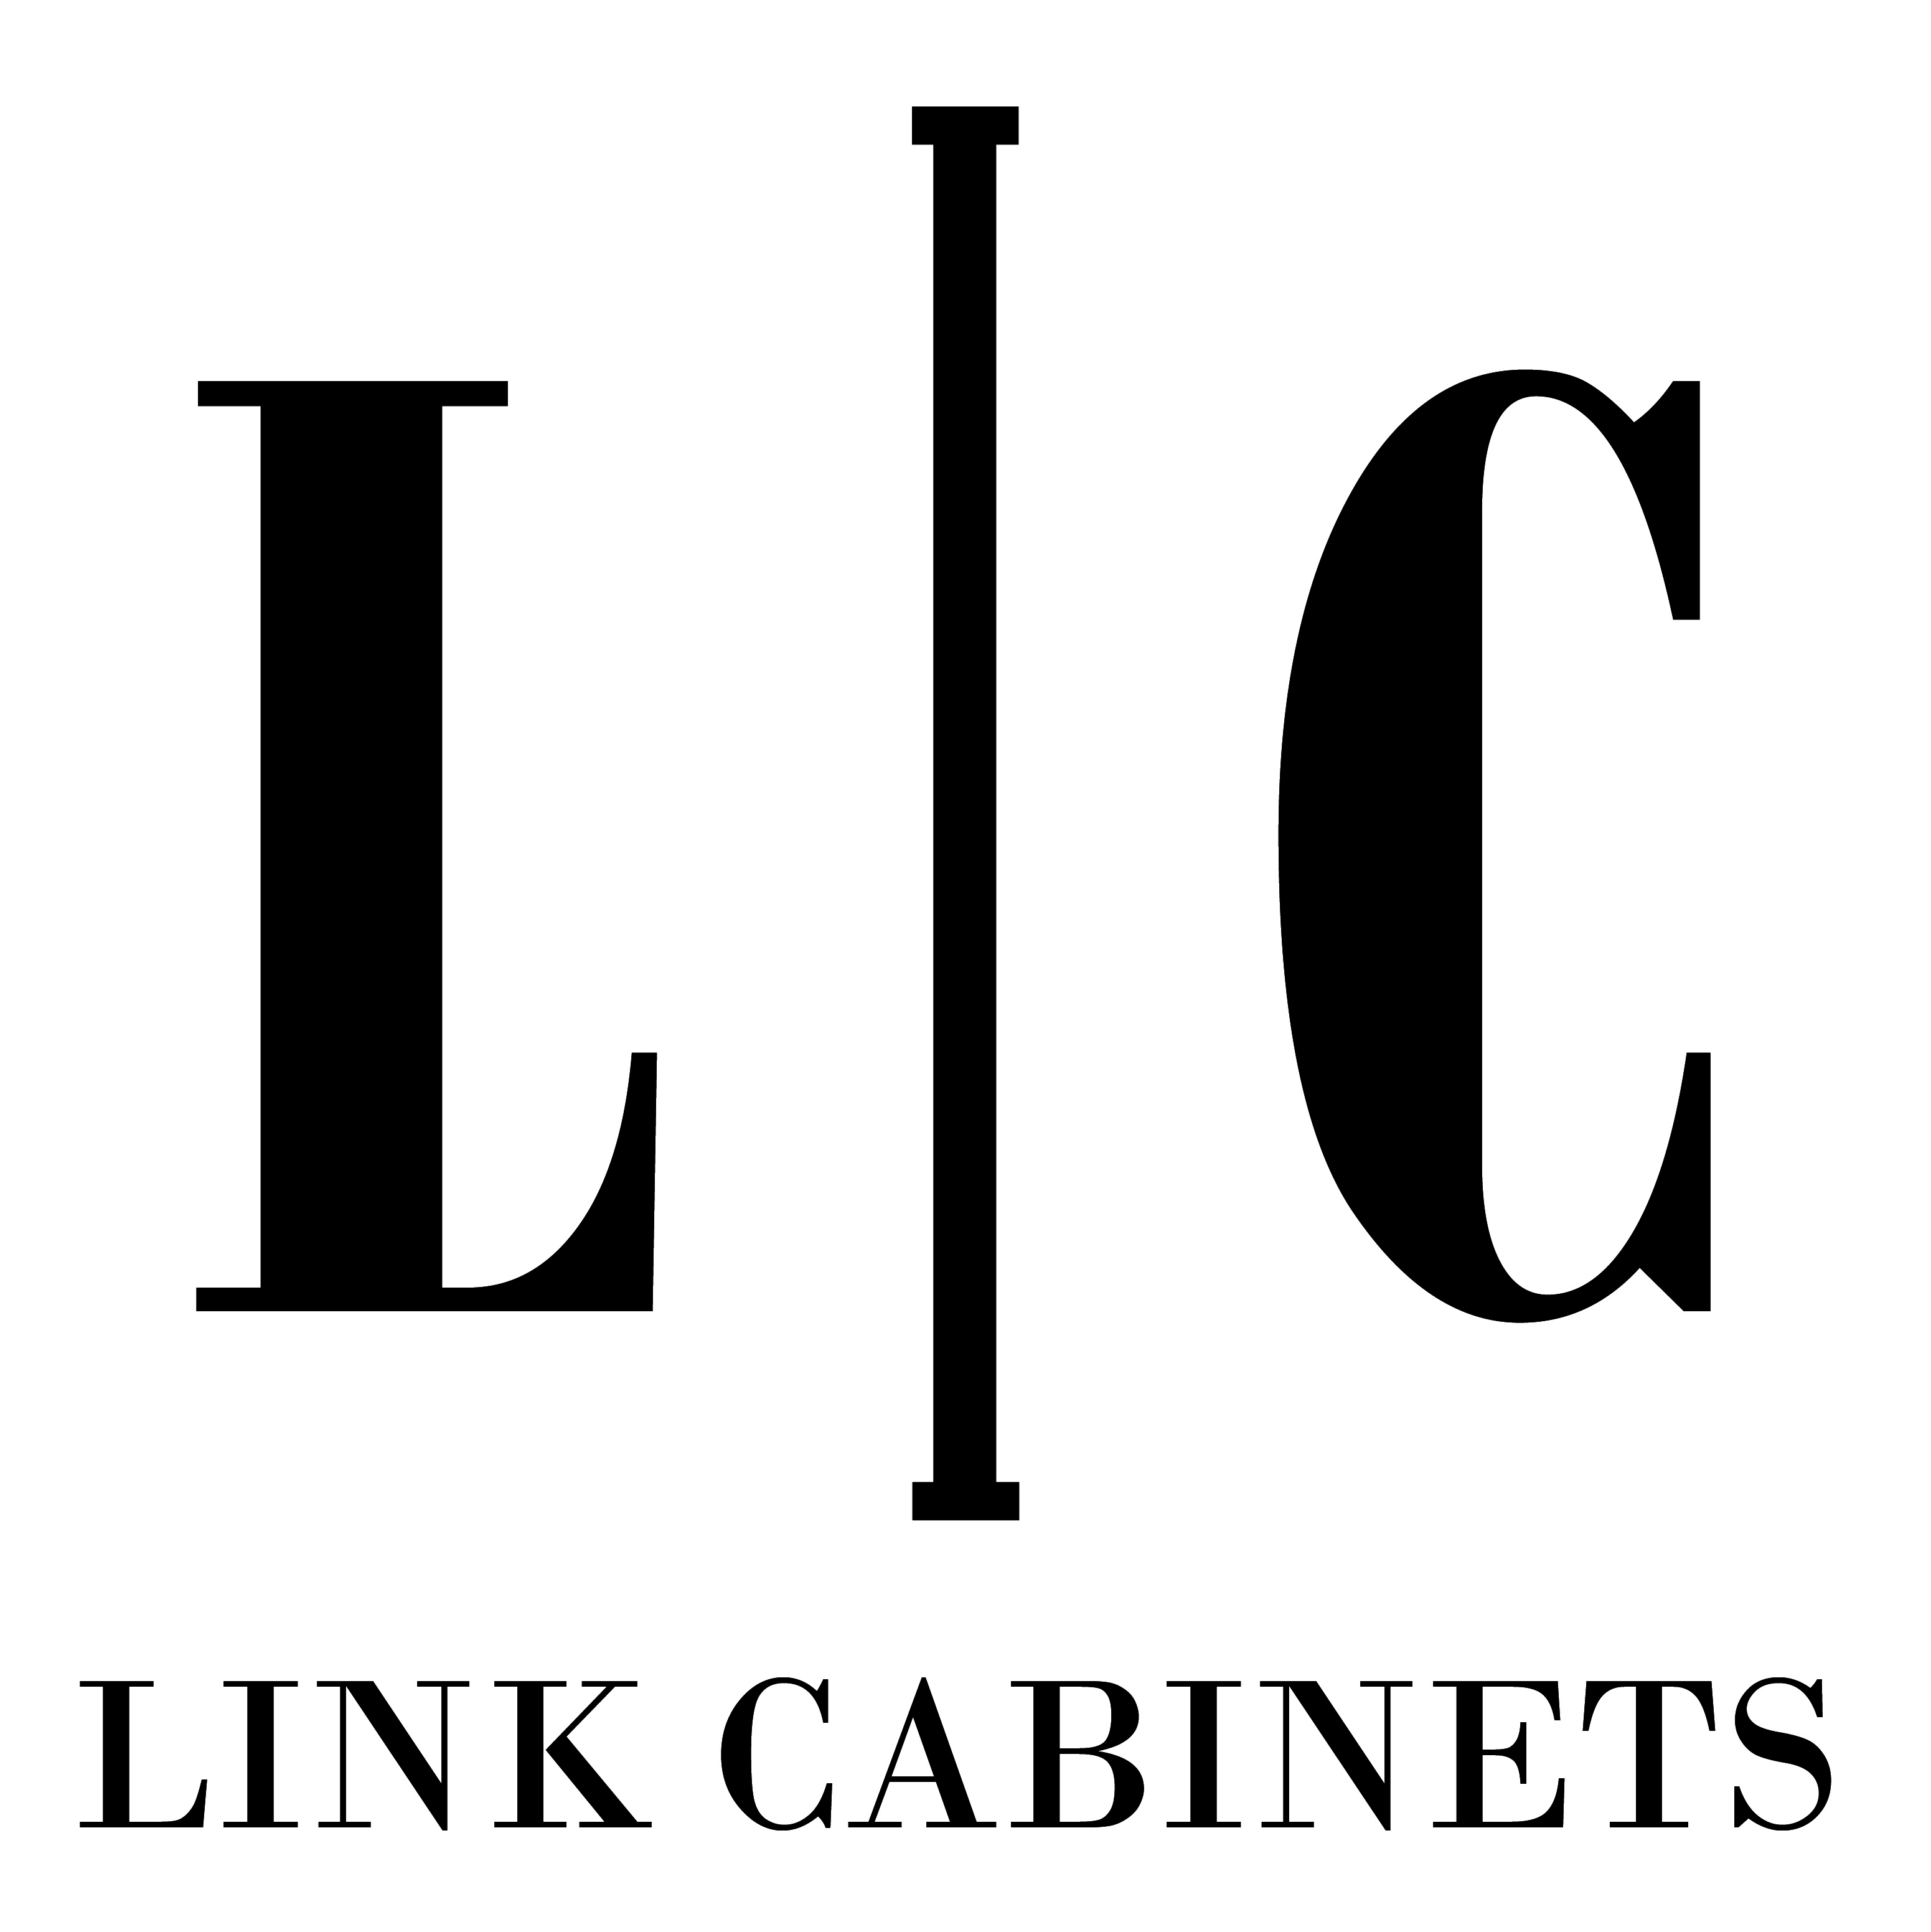 Link Cabinets Quality Woodworking Made To Order Since 1963